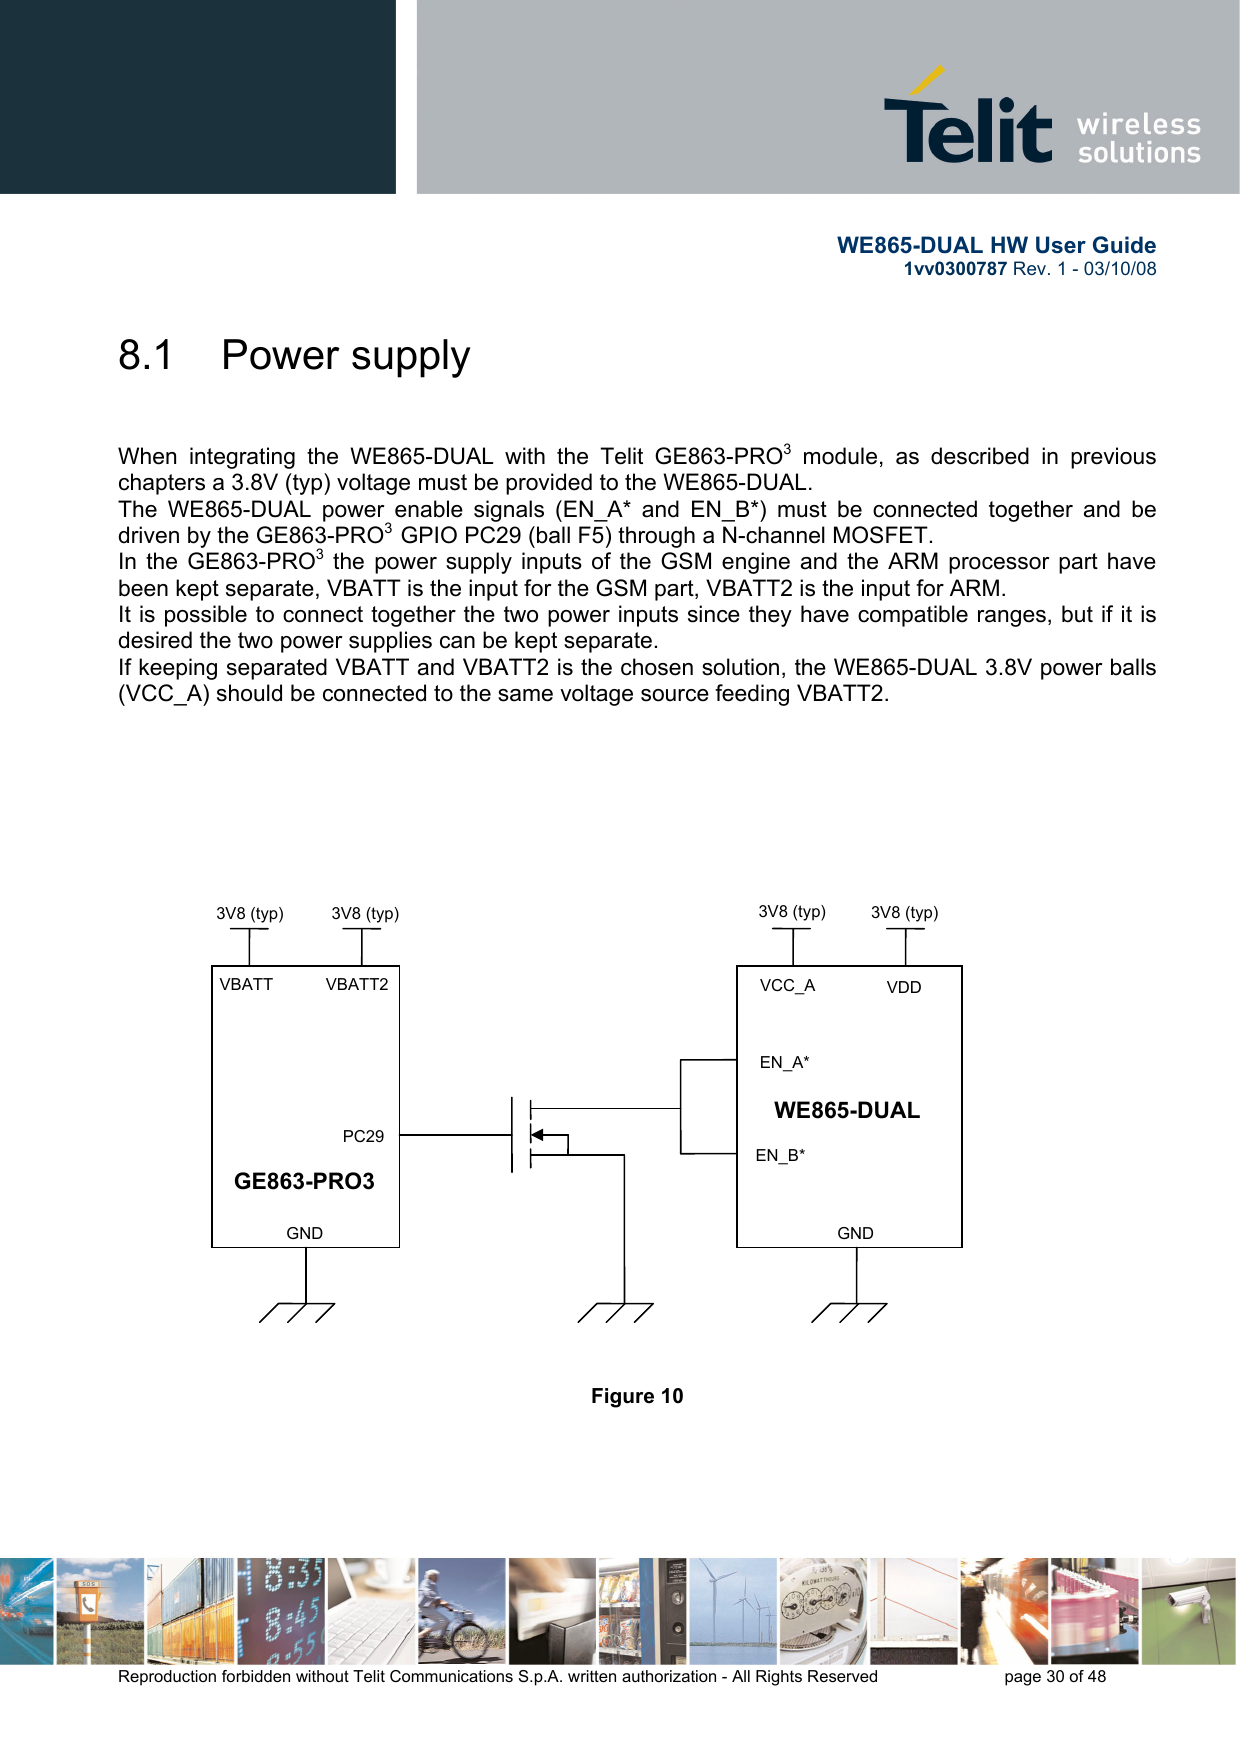       WE865-DUAL HW User Guide 1vv0300787 Rev. 1 - 03/10/08      Reproduction forbidden without Telit Communications S.p.A. written authorization - All Rights Reserved    page 30 of 48  8.1  Power supply   When integrating the WE865-DUAL with the Telit GE863-PRO3 module, as described in previous chapters a 3.8V (typ) voltage must be provided to the WE865-DUAL. The WE865-DUAL power enable signals (EN_A* and EN_B*) must be connected together and be driven by the GE863-PRO3  GPIO PC29 (ball F5) through a N-channel MOSFET. In the GE863-PRO3 the power supply inputs of the GSM engine and the ARM processor part have been kept separate, VBATT is the input for the GSM part, VBATT2 is the input for ARM. It is possible to connect together the two power inputs since they have compatible ranges, but if it is desired the two power supplies can be kept separate. If keeping separated VBATT and VBATT2 is the chosen solution, the WE865-DUAL 3.8V power balls (VCC_A) should be connected to the same voltage source feeding VBATT2.                                 Figure 10      WE865-DUAL EN_B* EN_A* GE863-PRO3    PC29 3V8 (typ)  3V8 (typ) VBATT  VBATT2 3V8 (typ) 3V8 (typ)    GND    GNDVCC_A  VDD 